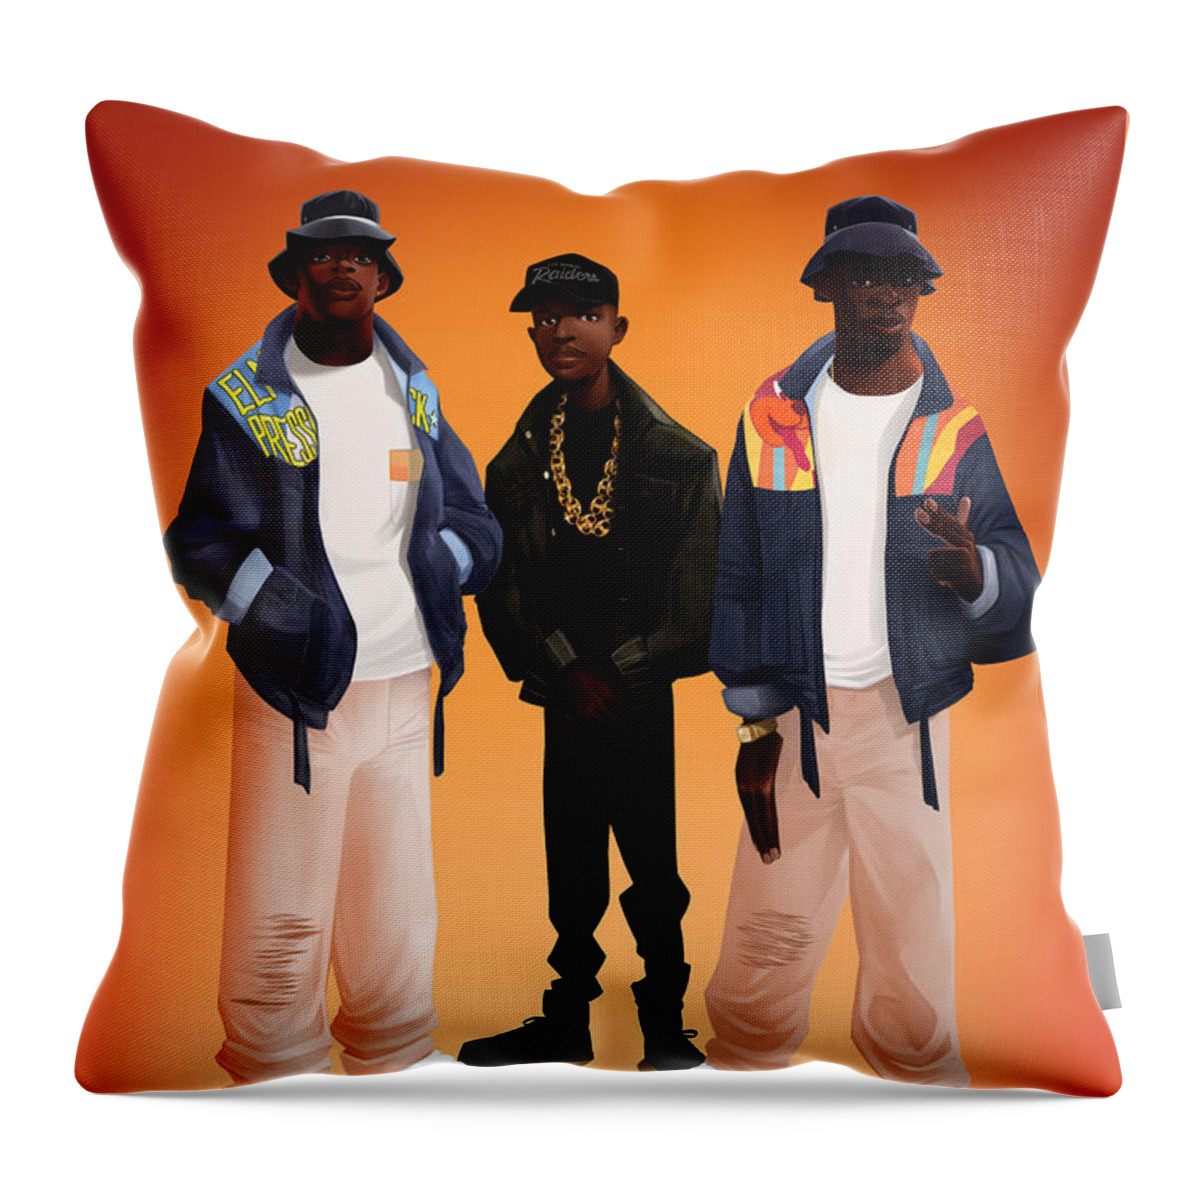 Hiphop Throw Pillow featuring the digital art Give The People by Nelson dedos Garcia